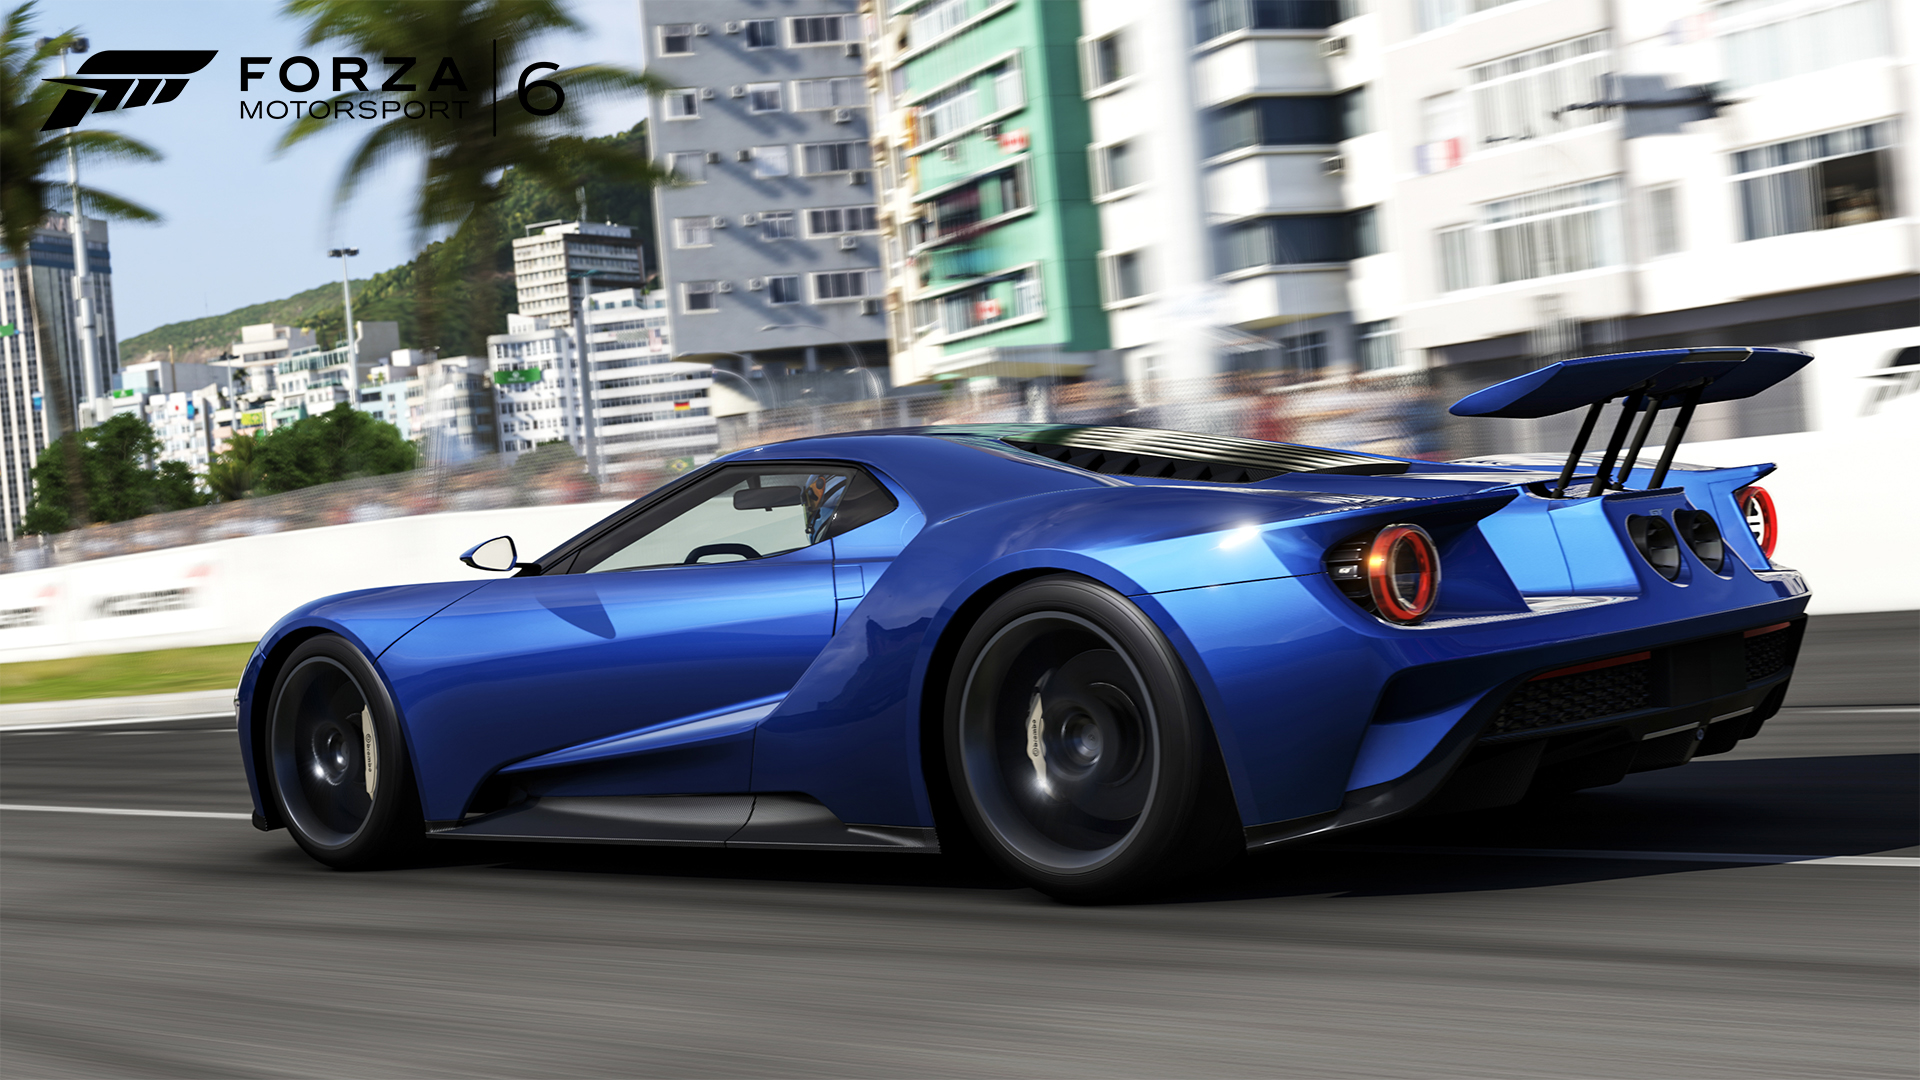 video game, forza motorsport 6, forza UHD